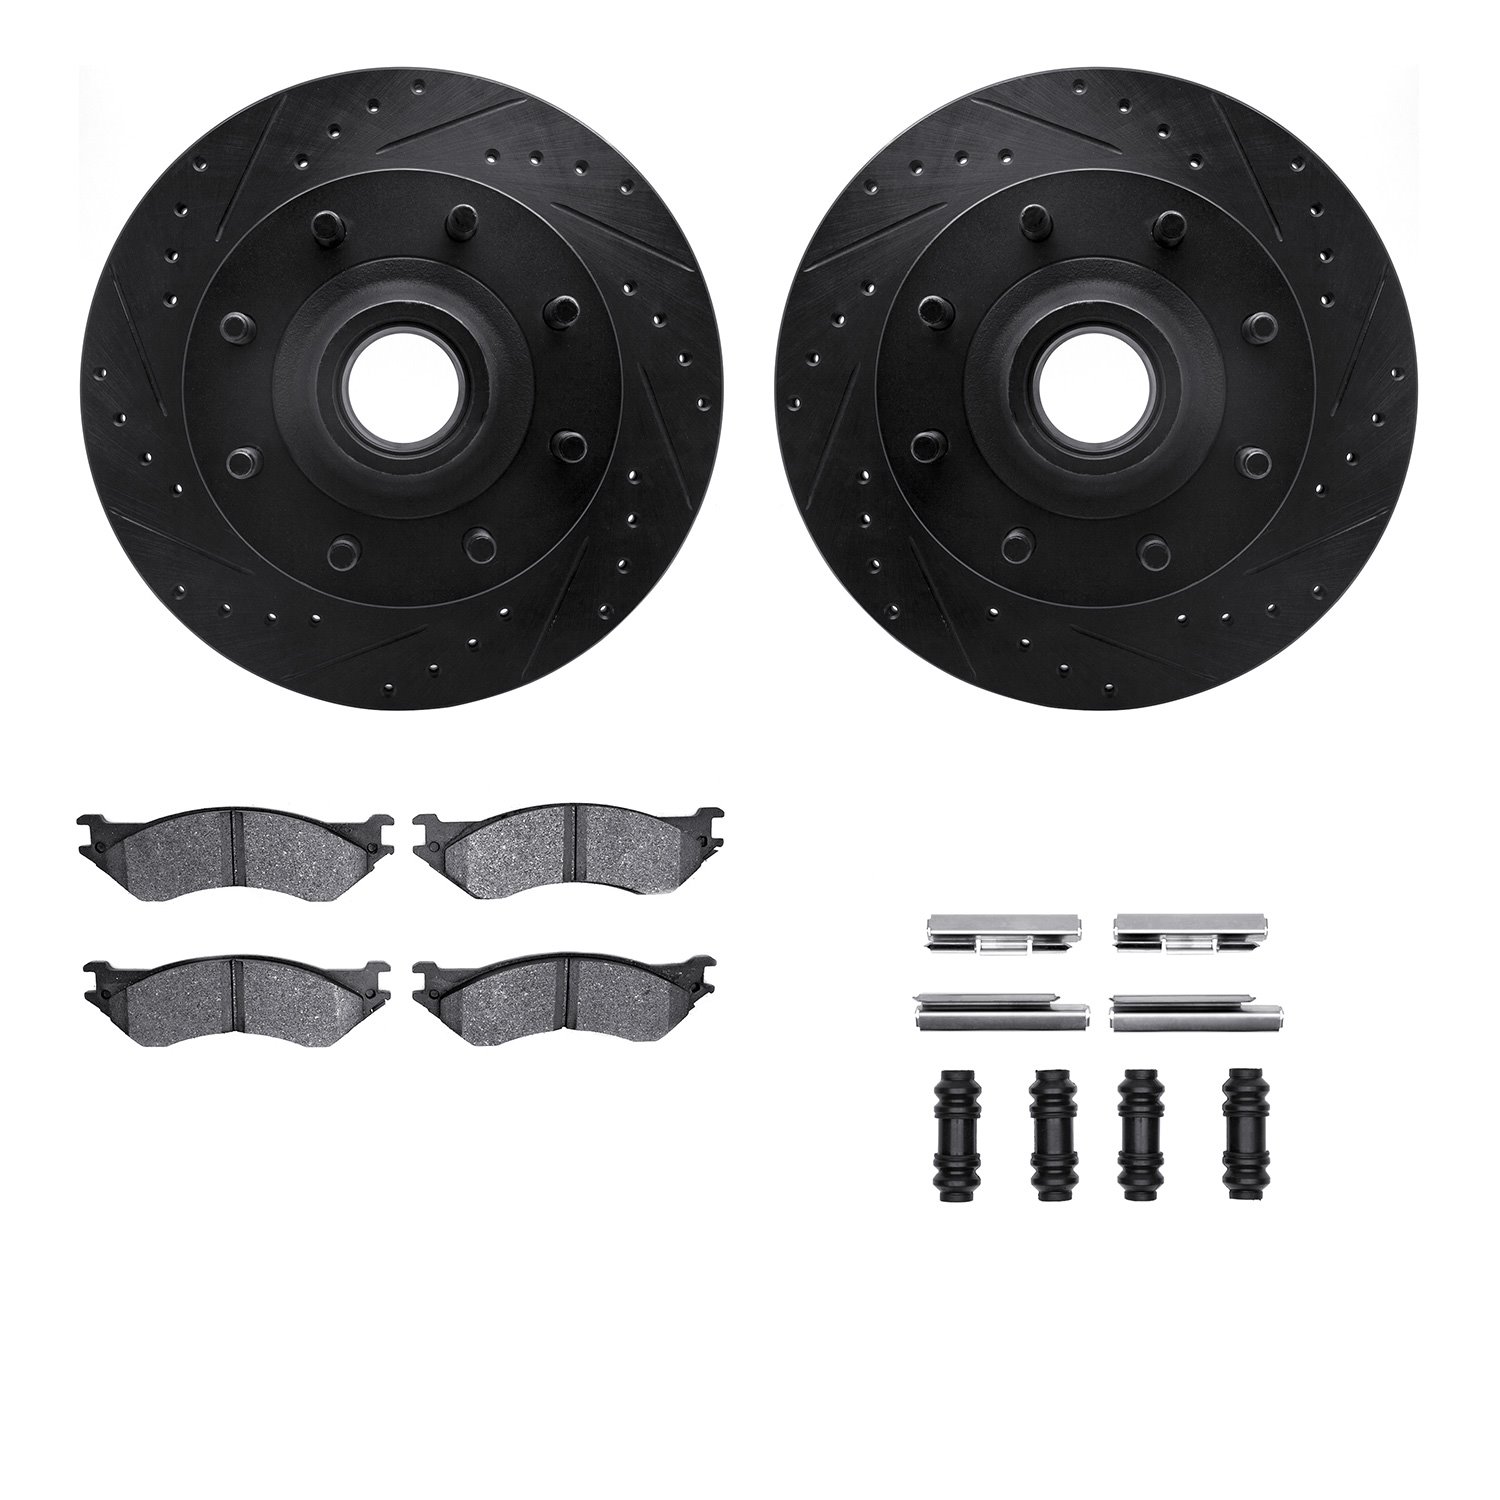 8412-54025 Drilled/Slotted Brake Rotors with Ultimate-Duty Brake Pads Kit & Hardware [Black], 2000-2004 Ford/Lincoln/Mercury/Maz